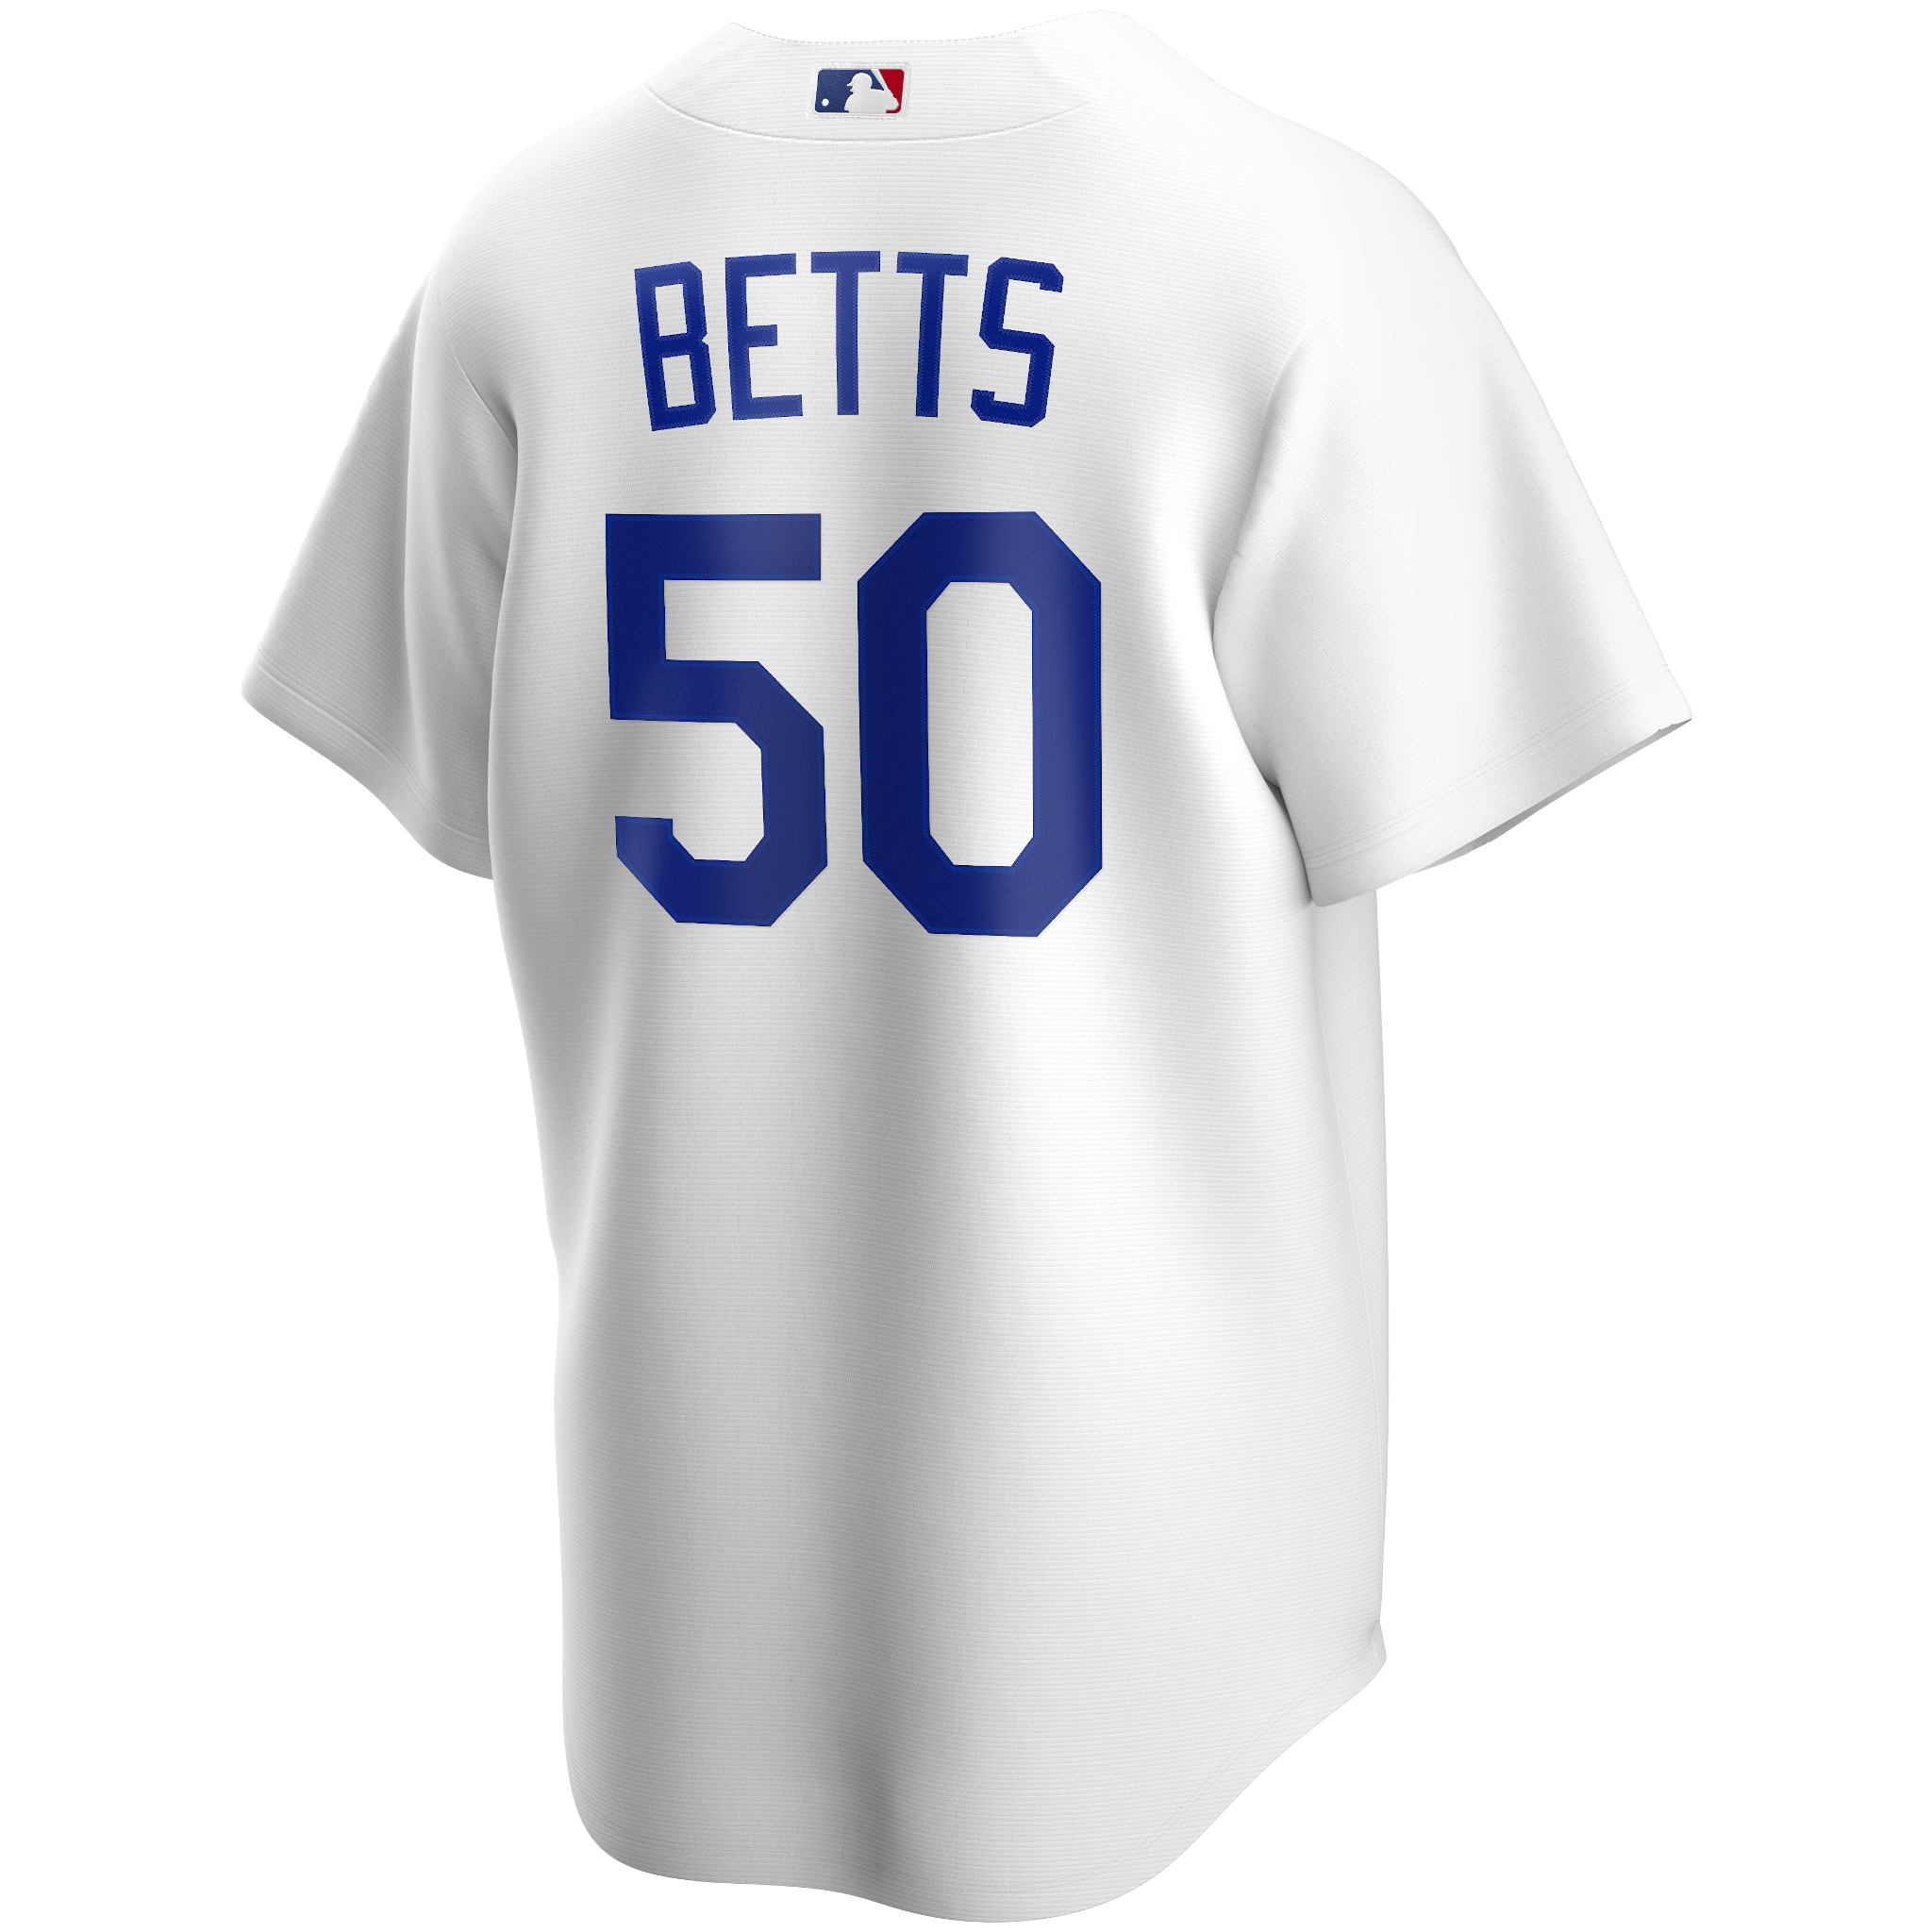 Dodgers Mookie Betts Jersey Size S M L XL XXL for Sale in Los Angeles, CA -  OfferUp